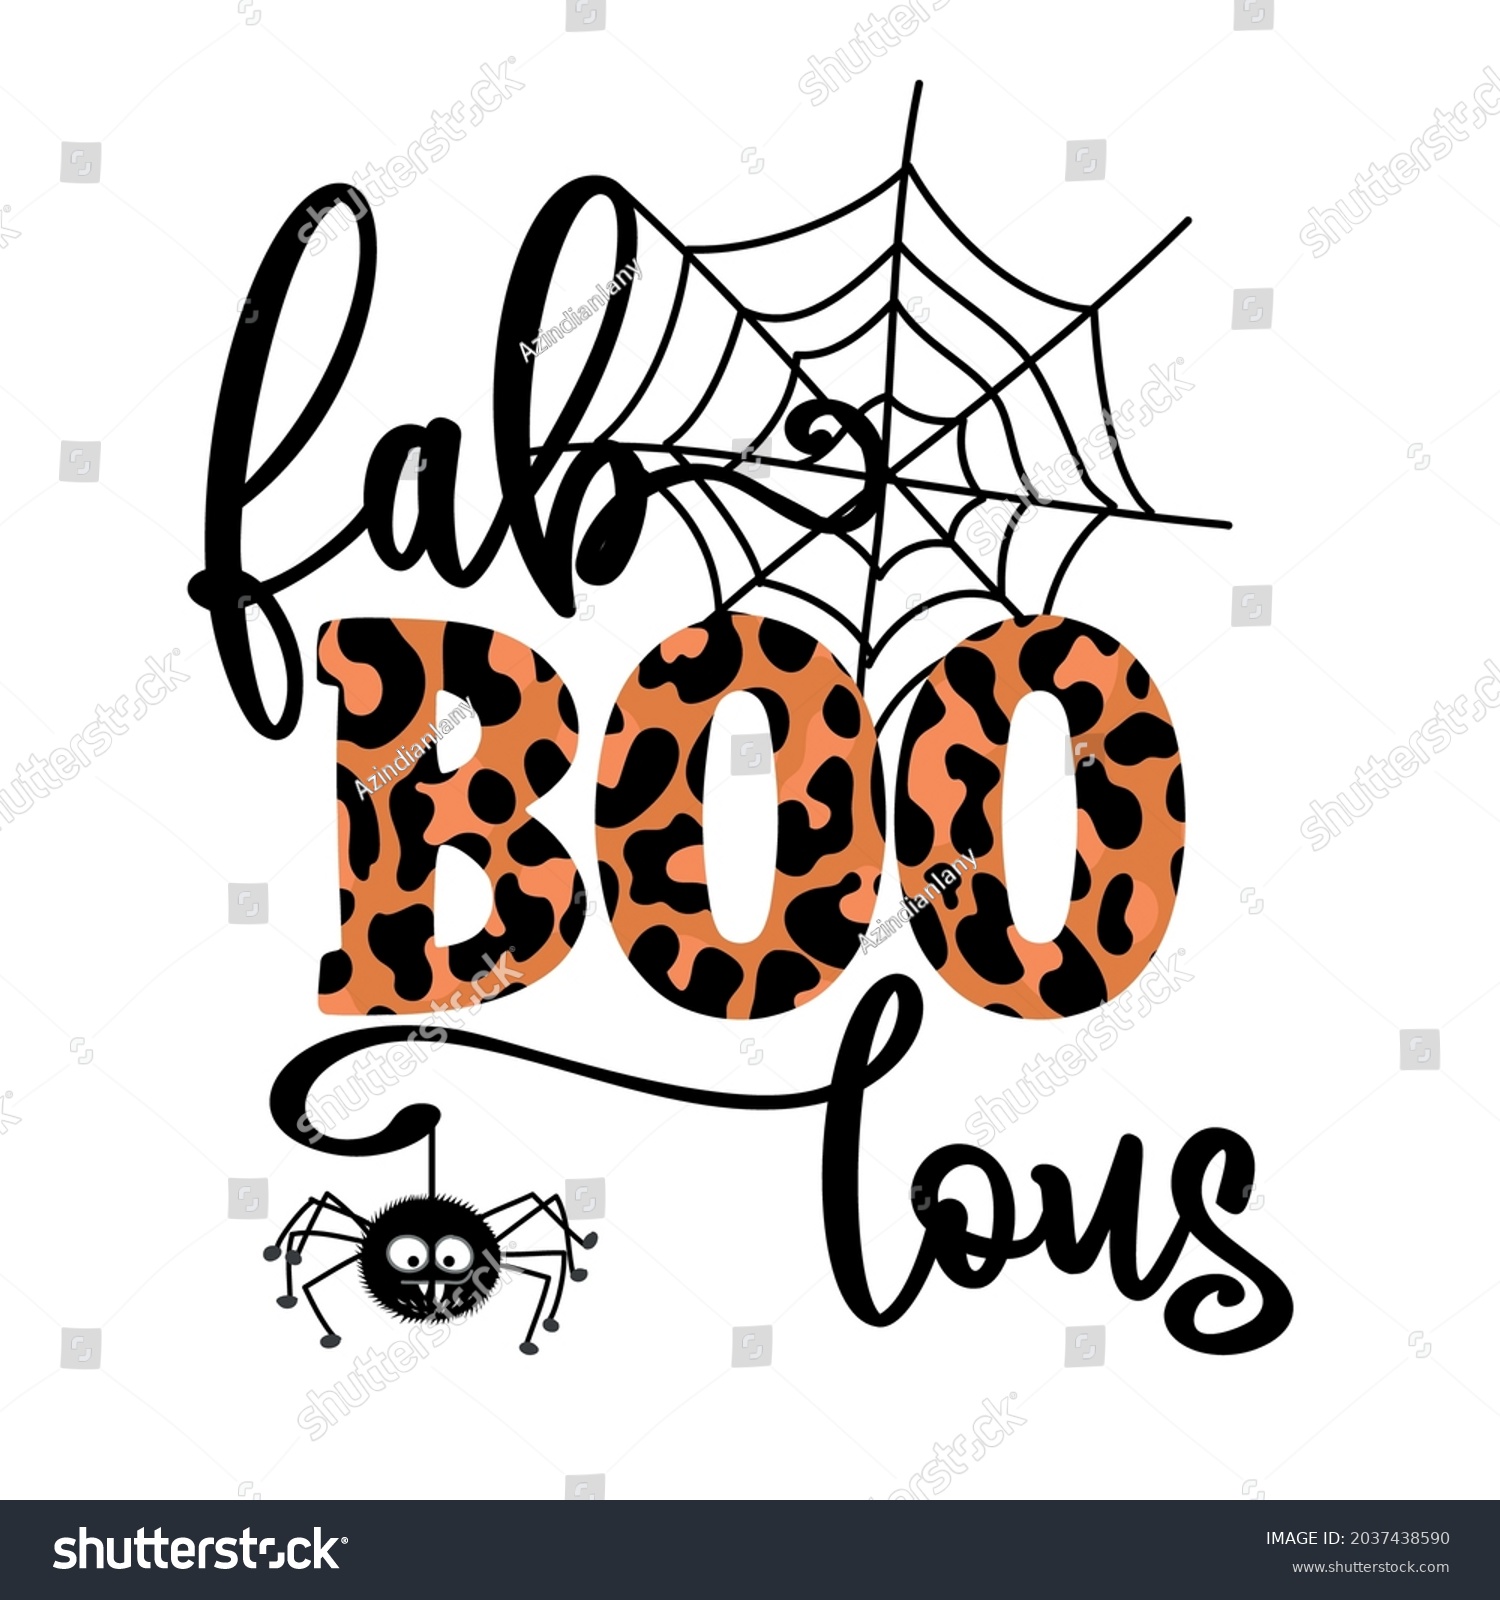 SVG of Fabulous, Fabulous - Happy Halloween overlays, lettering label design with cute hairy hanging spider. Hand drawn isolated emblem with quote. Halloween party decoration or greeting cards.  svg